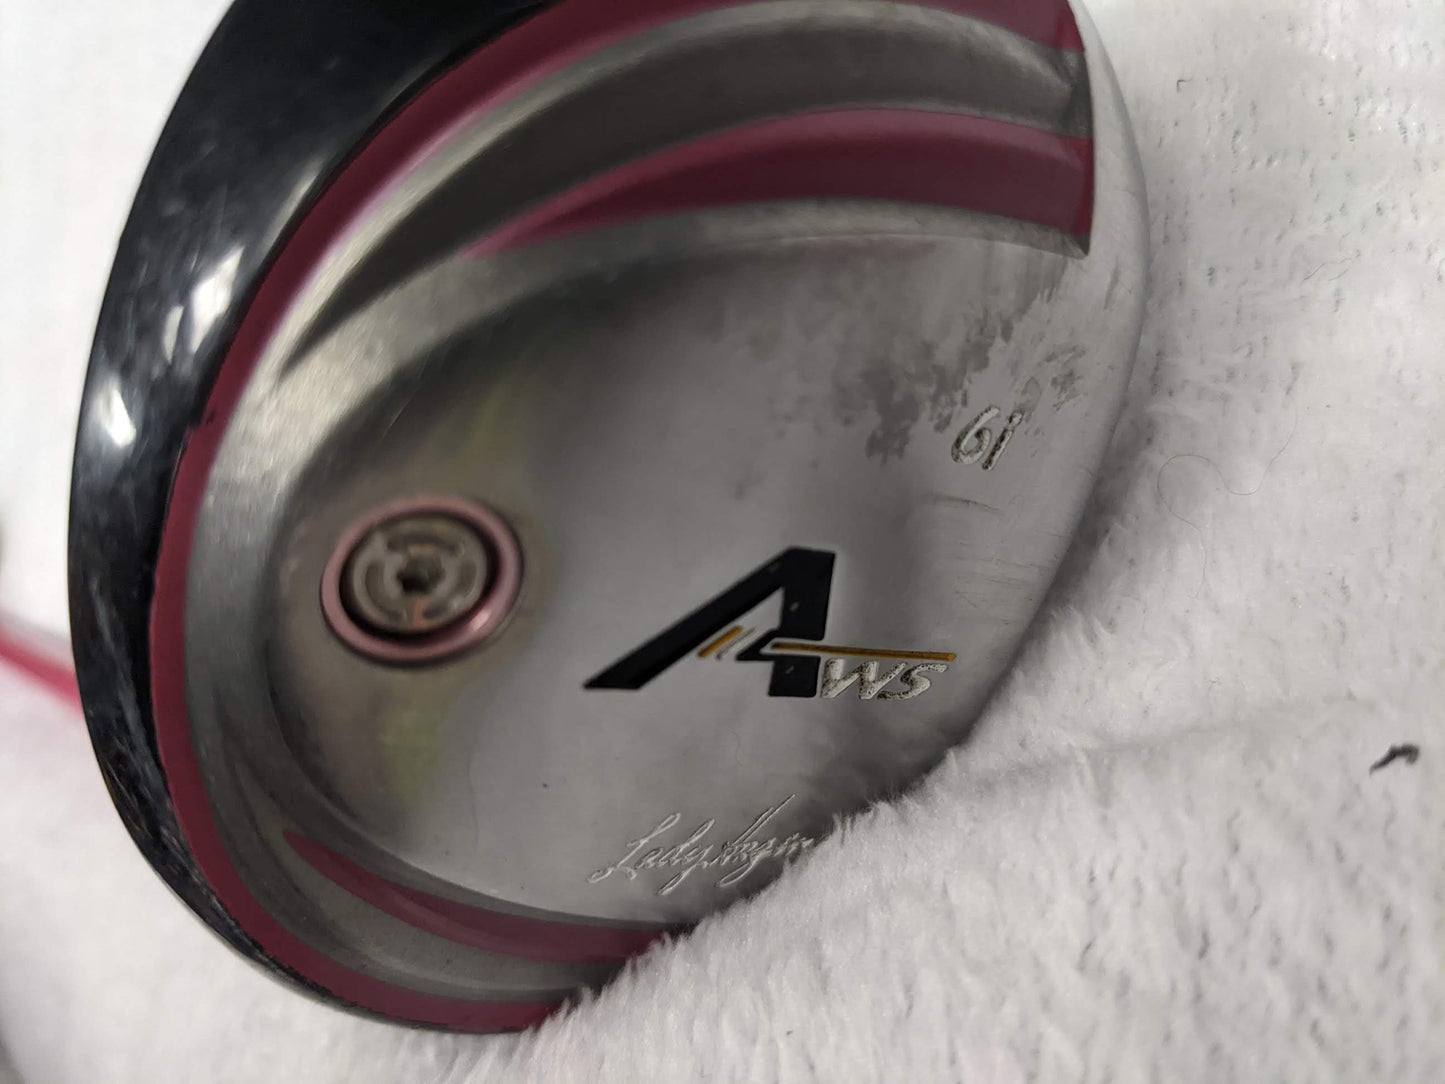 Lady Hagan Women's AWS Hybrid Driver Golf Club Right Hand Size 38 In Color Pink Condition Used